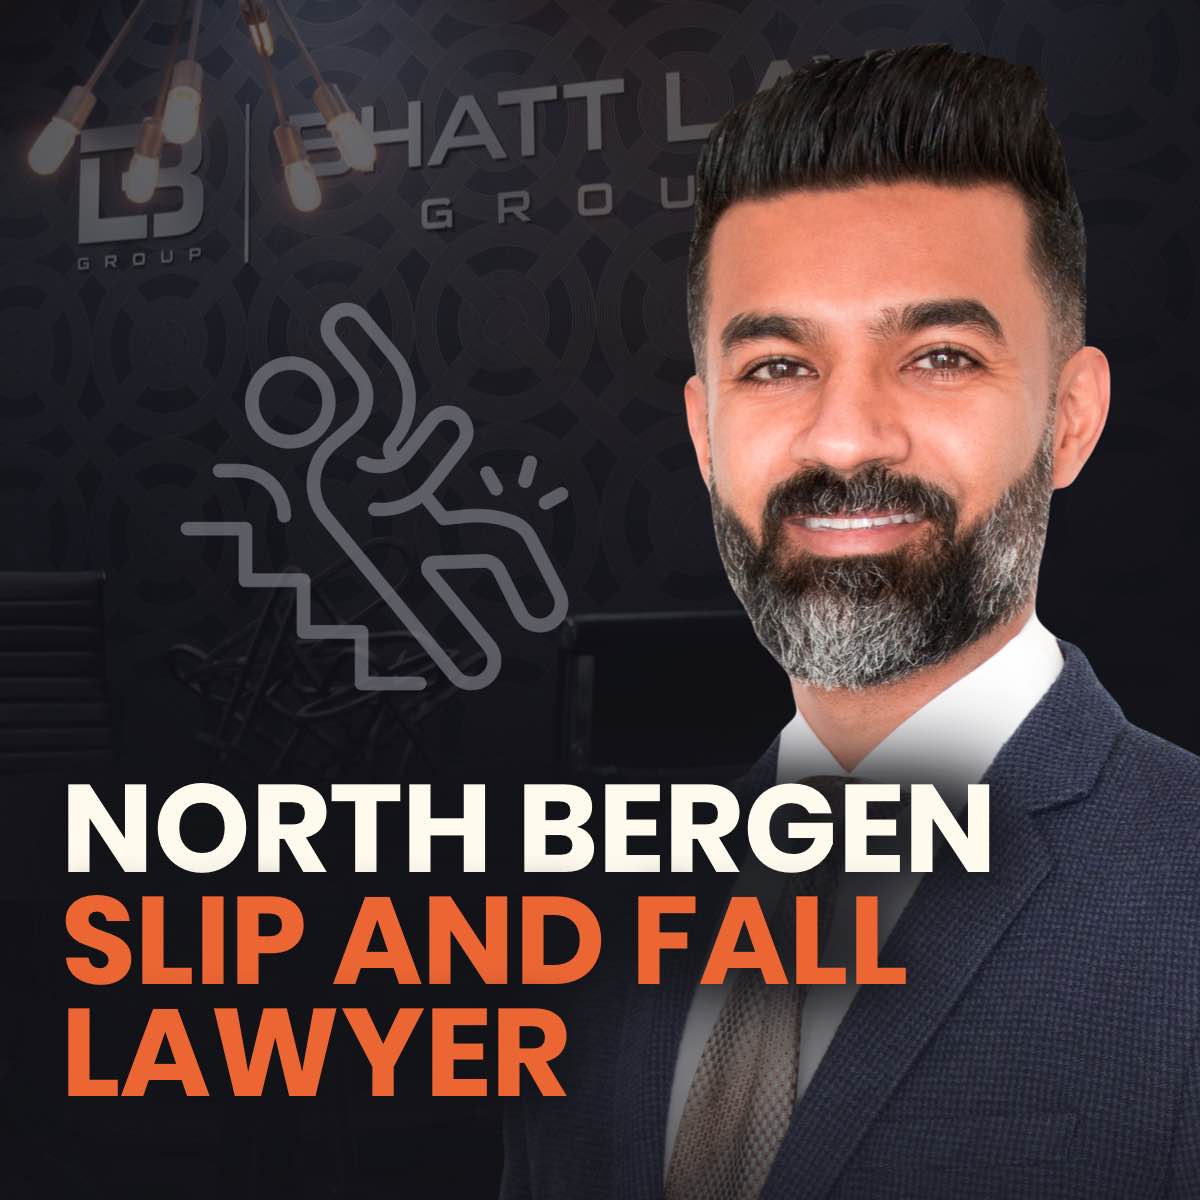 North Bergen Slip and Fall Lawyer